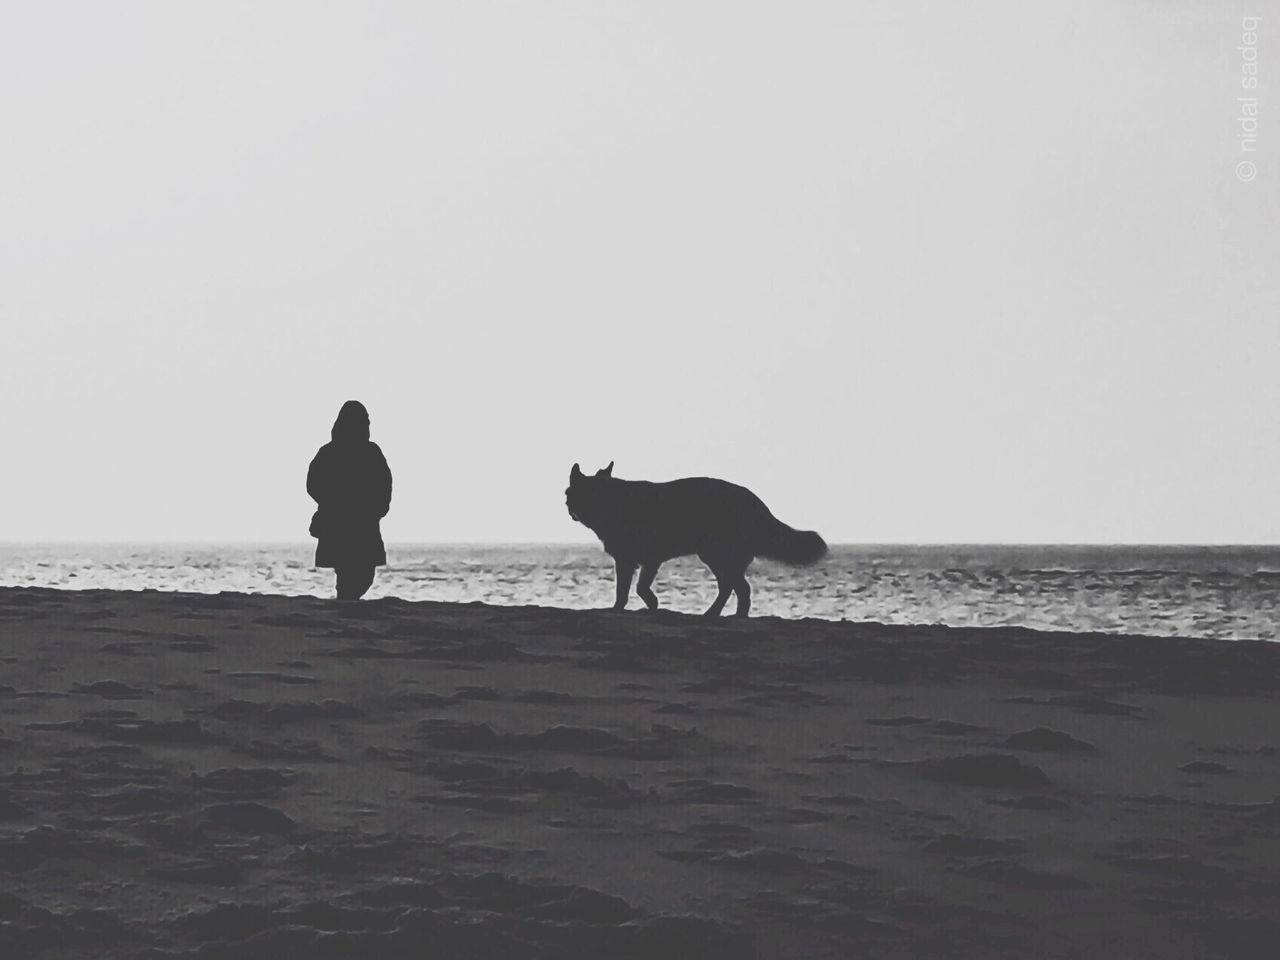 animal themes, domestic animals, mammal, sea, clear sky, one animal, water, dog, horizon over water, pets, beach, copy space, silhouette, standing, full length, walking, shore, nature, men, tranquility